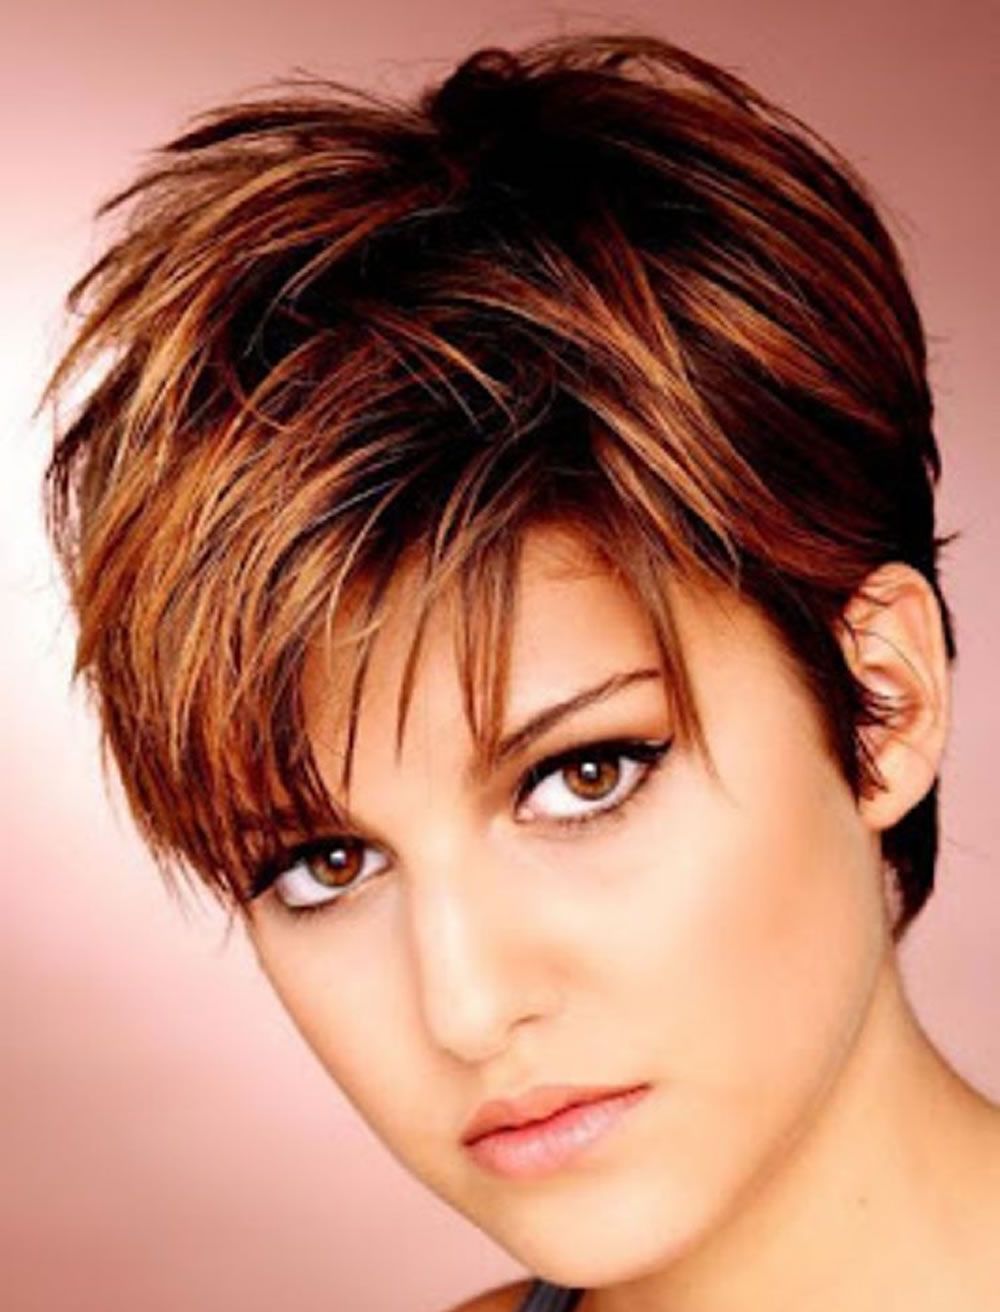 Short Haircuts For Round Face Thin Hair Ideas For 2018 – Hairstyles Throughout Short Hairstyles For Full Round Faces (View 22 of 25)